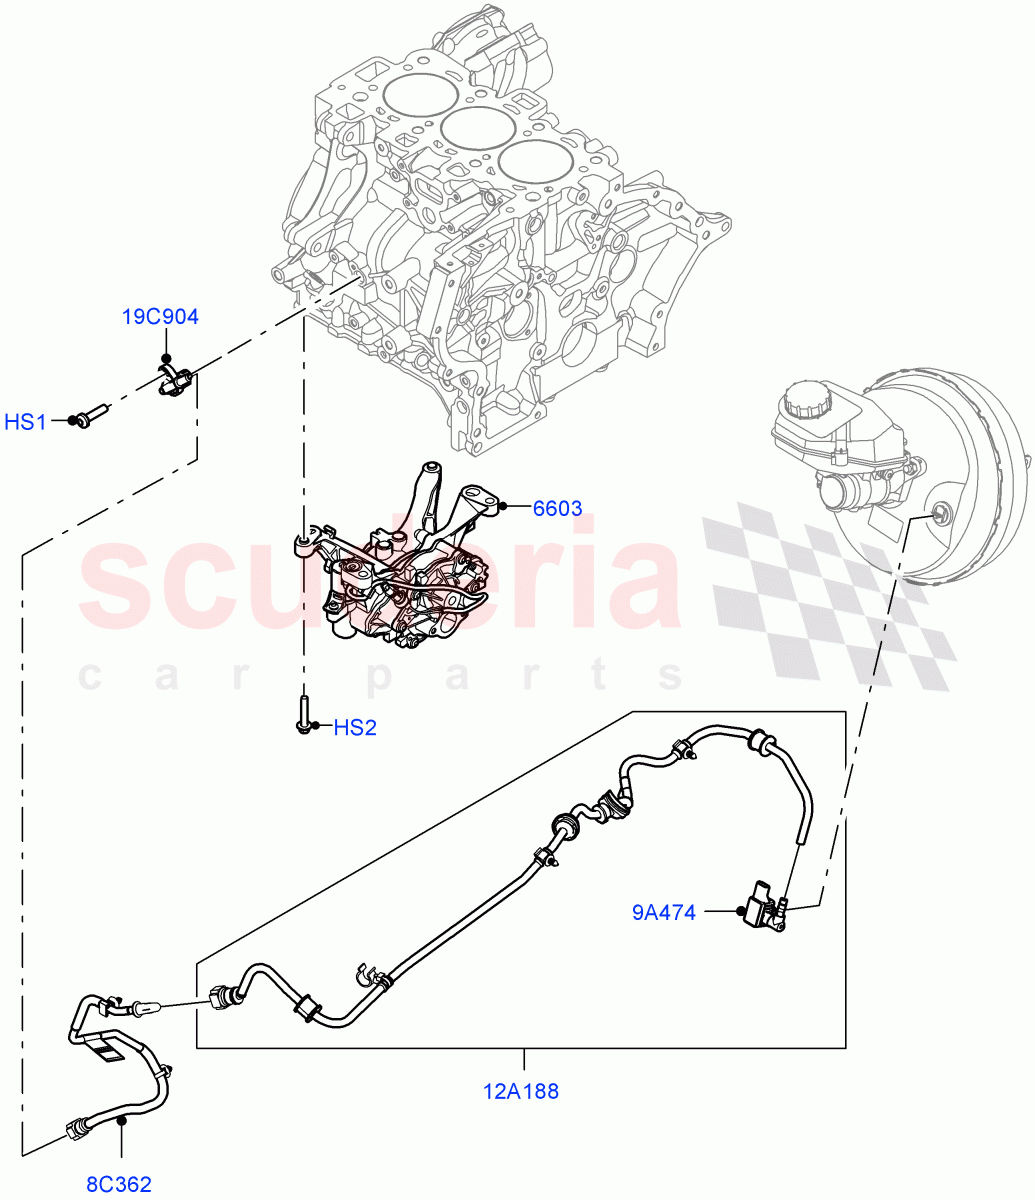 Vacuum Control And Air Injection(1.5L AJ20P3 Petrol High,8 Speed Automatic Trans 8G30,Changsu (China)) of Land Rover Land Rover Discovery Sport (2015+) [1.5 I3 Turbo Petrol AJ20P3]